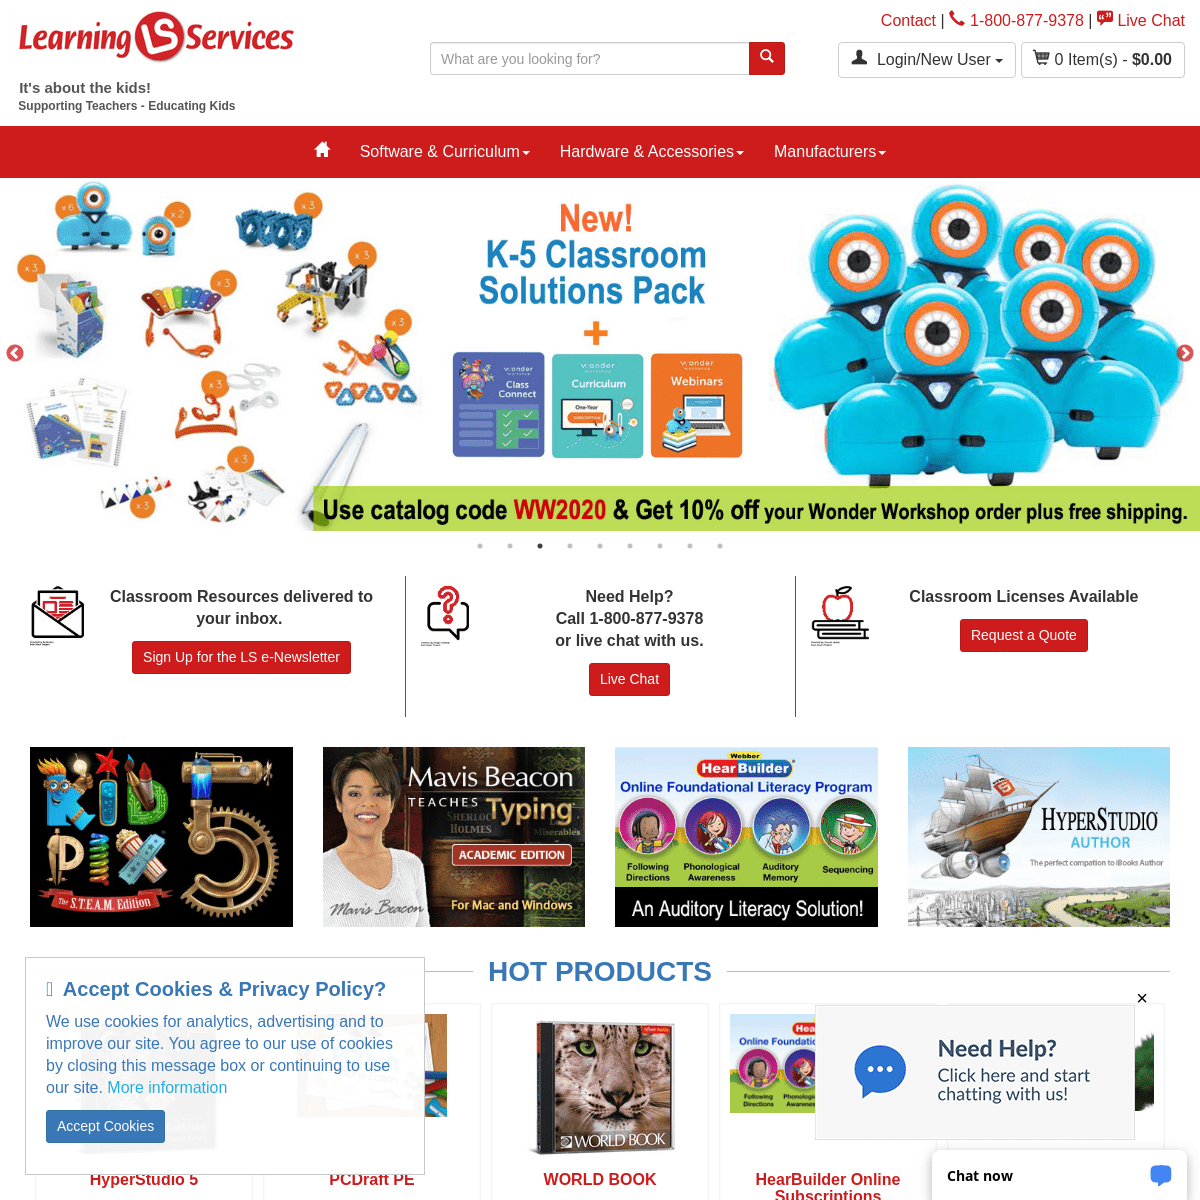 A complete backup of learningservicesus.com